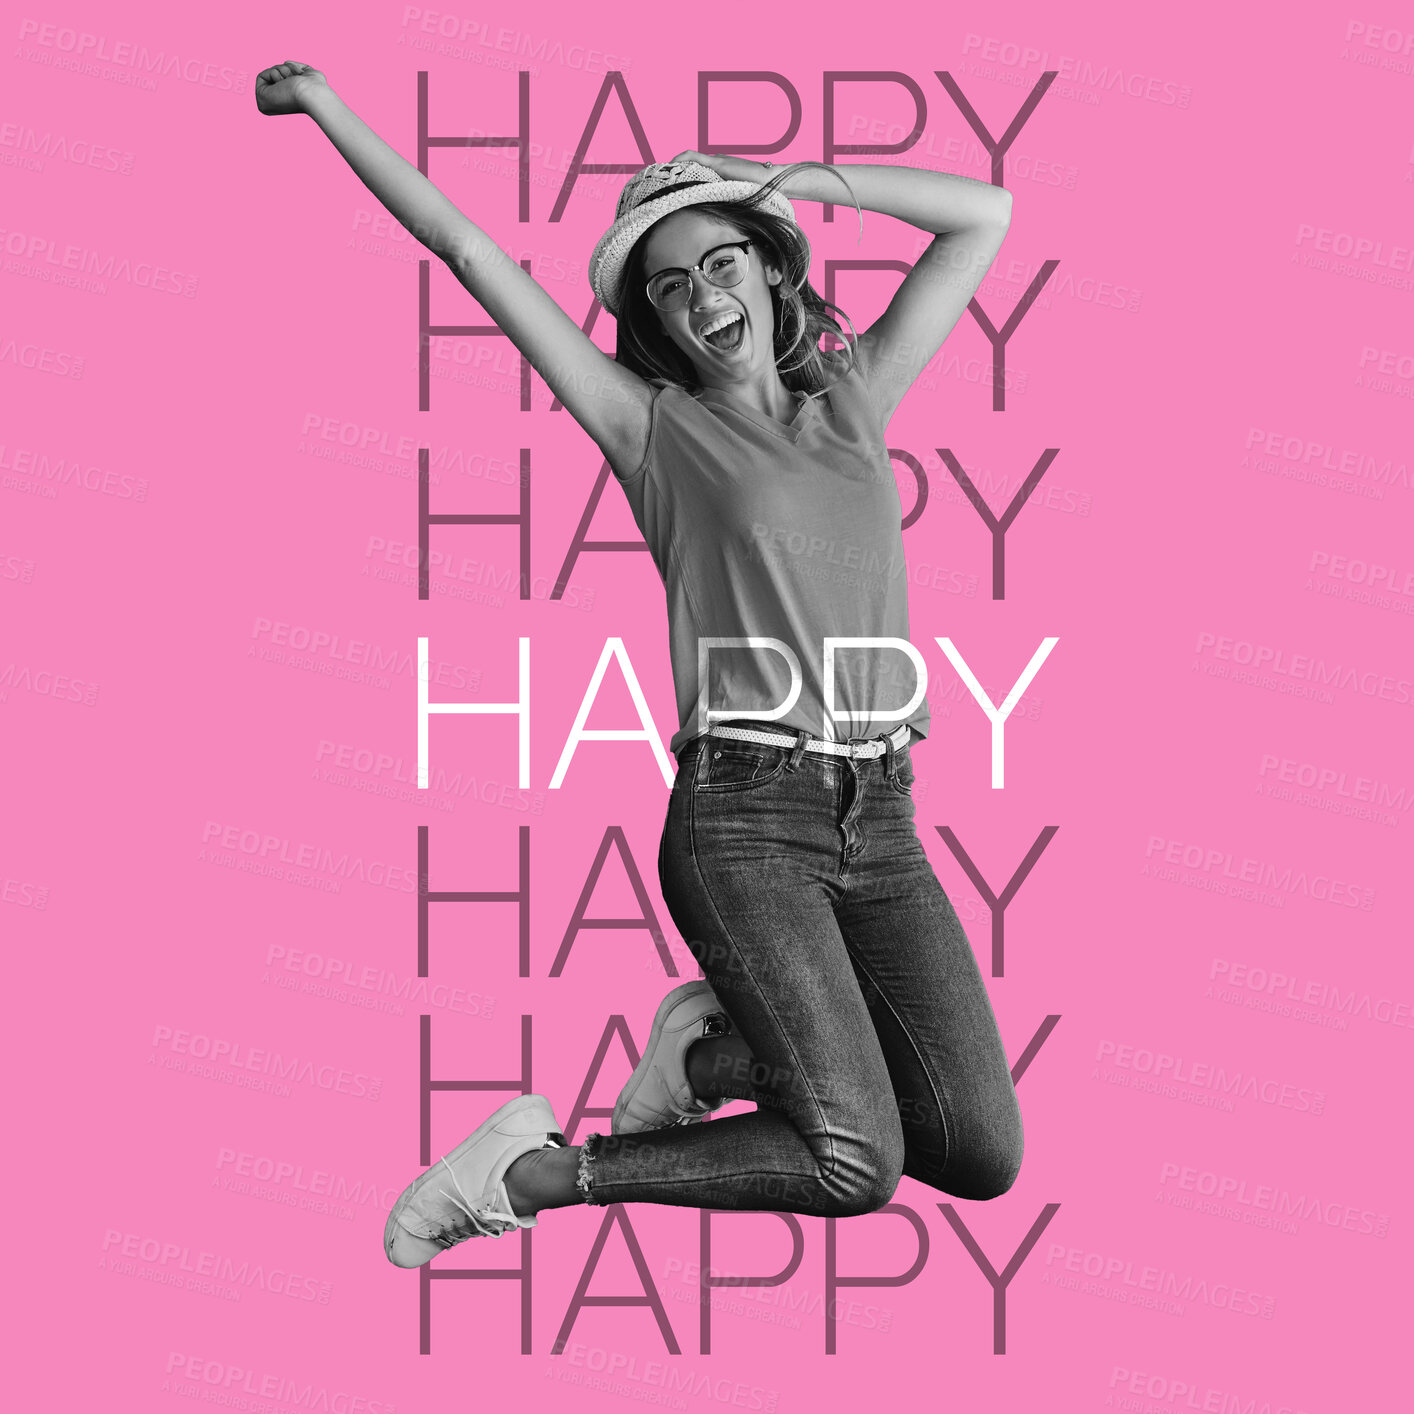 Buy stock photo Happy woman, jump and freedom with motivation words, overlay with carefree youth on inspirational poster on pink background. Energy, free and happiness, portrait and action with advice and text